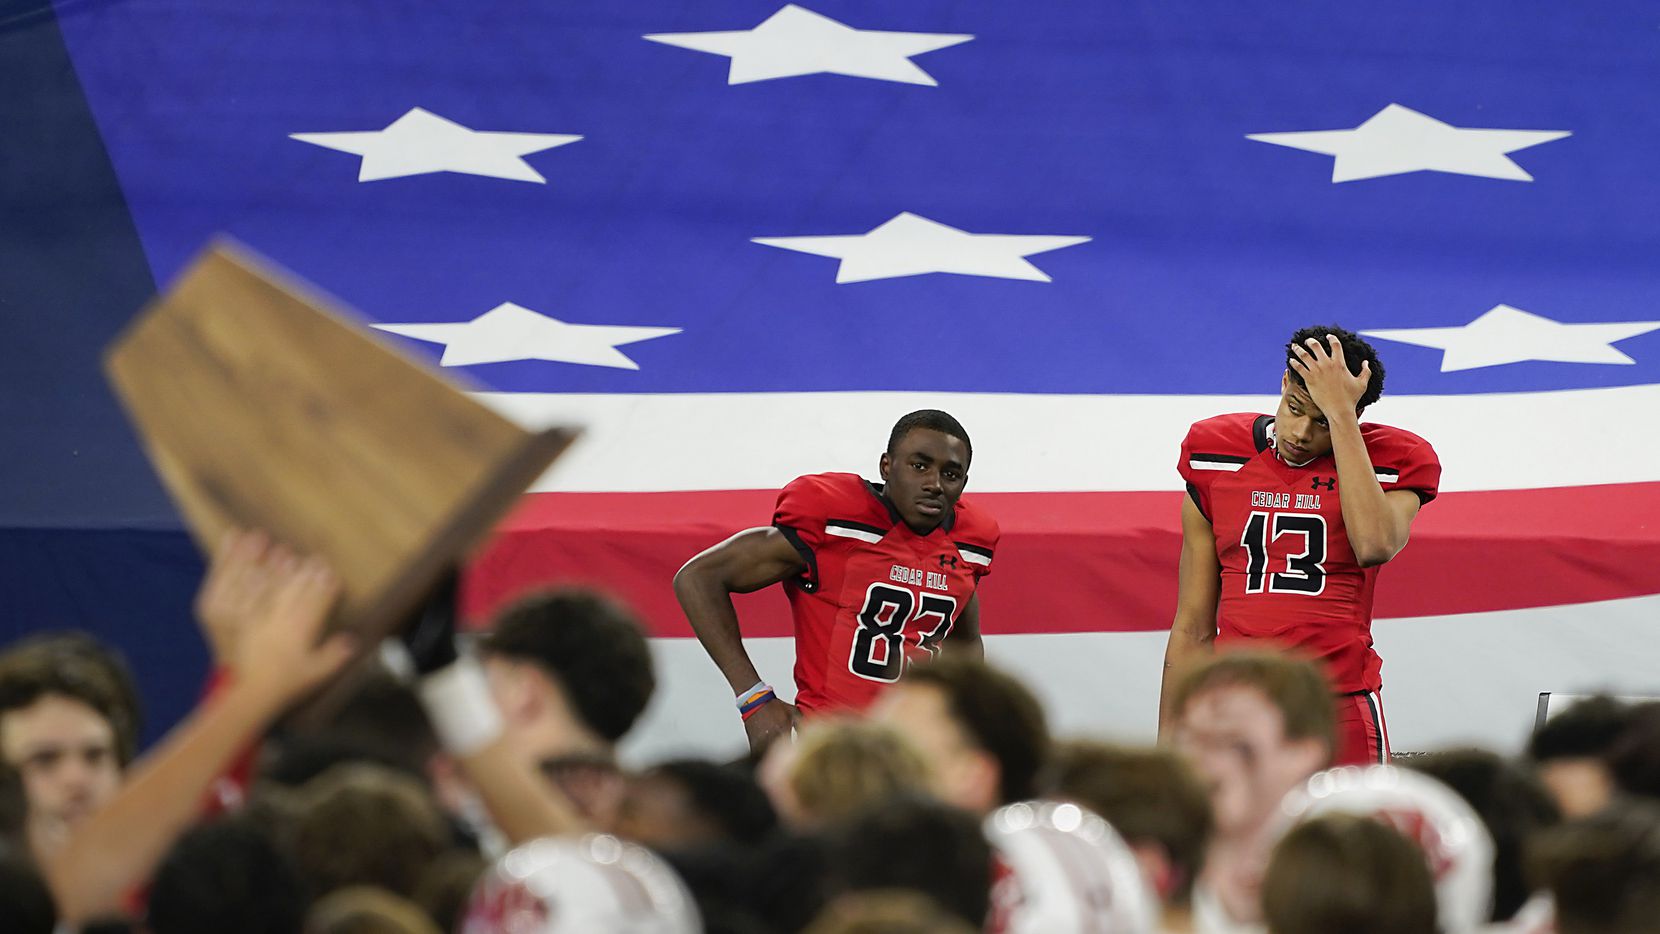 Cedar Hill wide receivers Javien Clemmer (13) and  Felton Brisco (83) watch from the bench as Katy players celebrate with the championship trophy after winning the Class 6A Division II state football championship game at AT&T Stadium on Saturday, Jan. 16, 2021, in Arlington, Texas. Katy won the game 51-14.